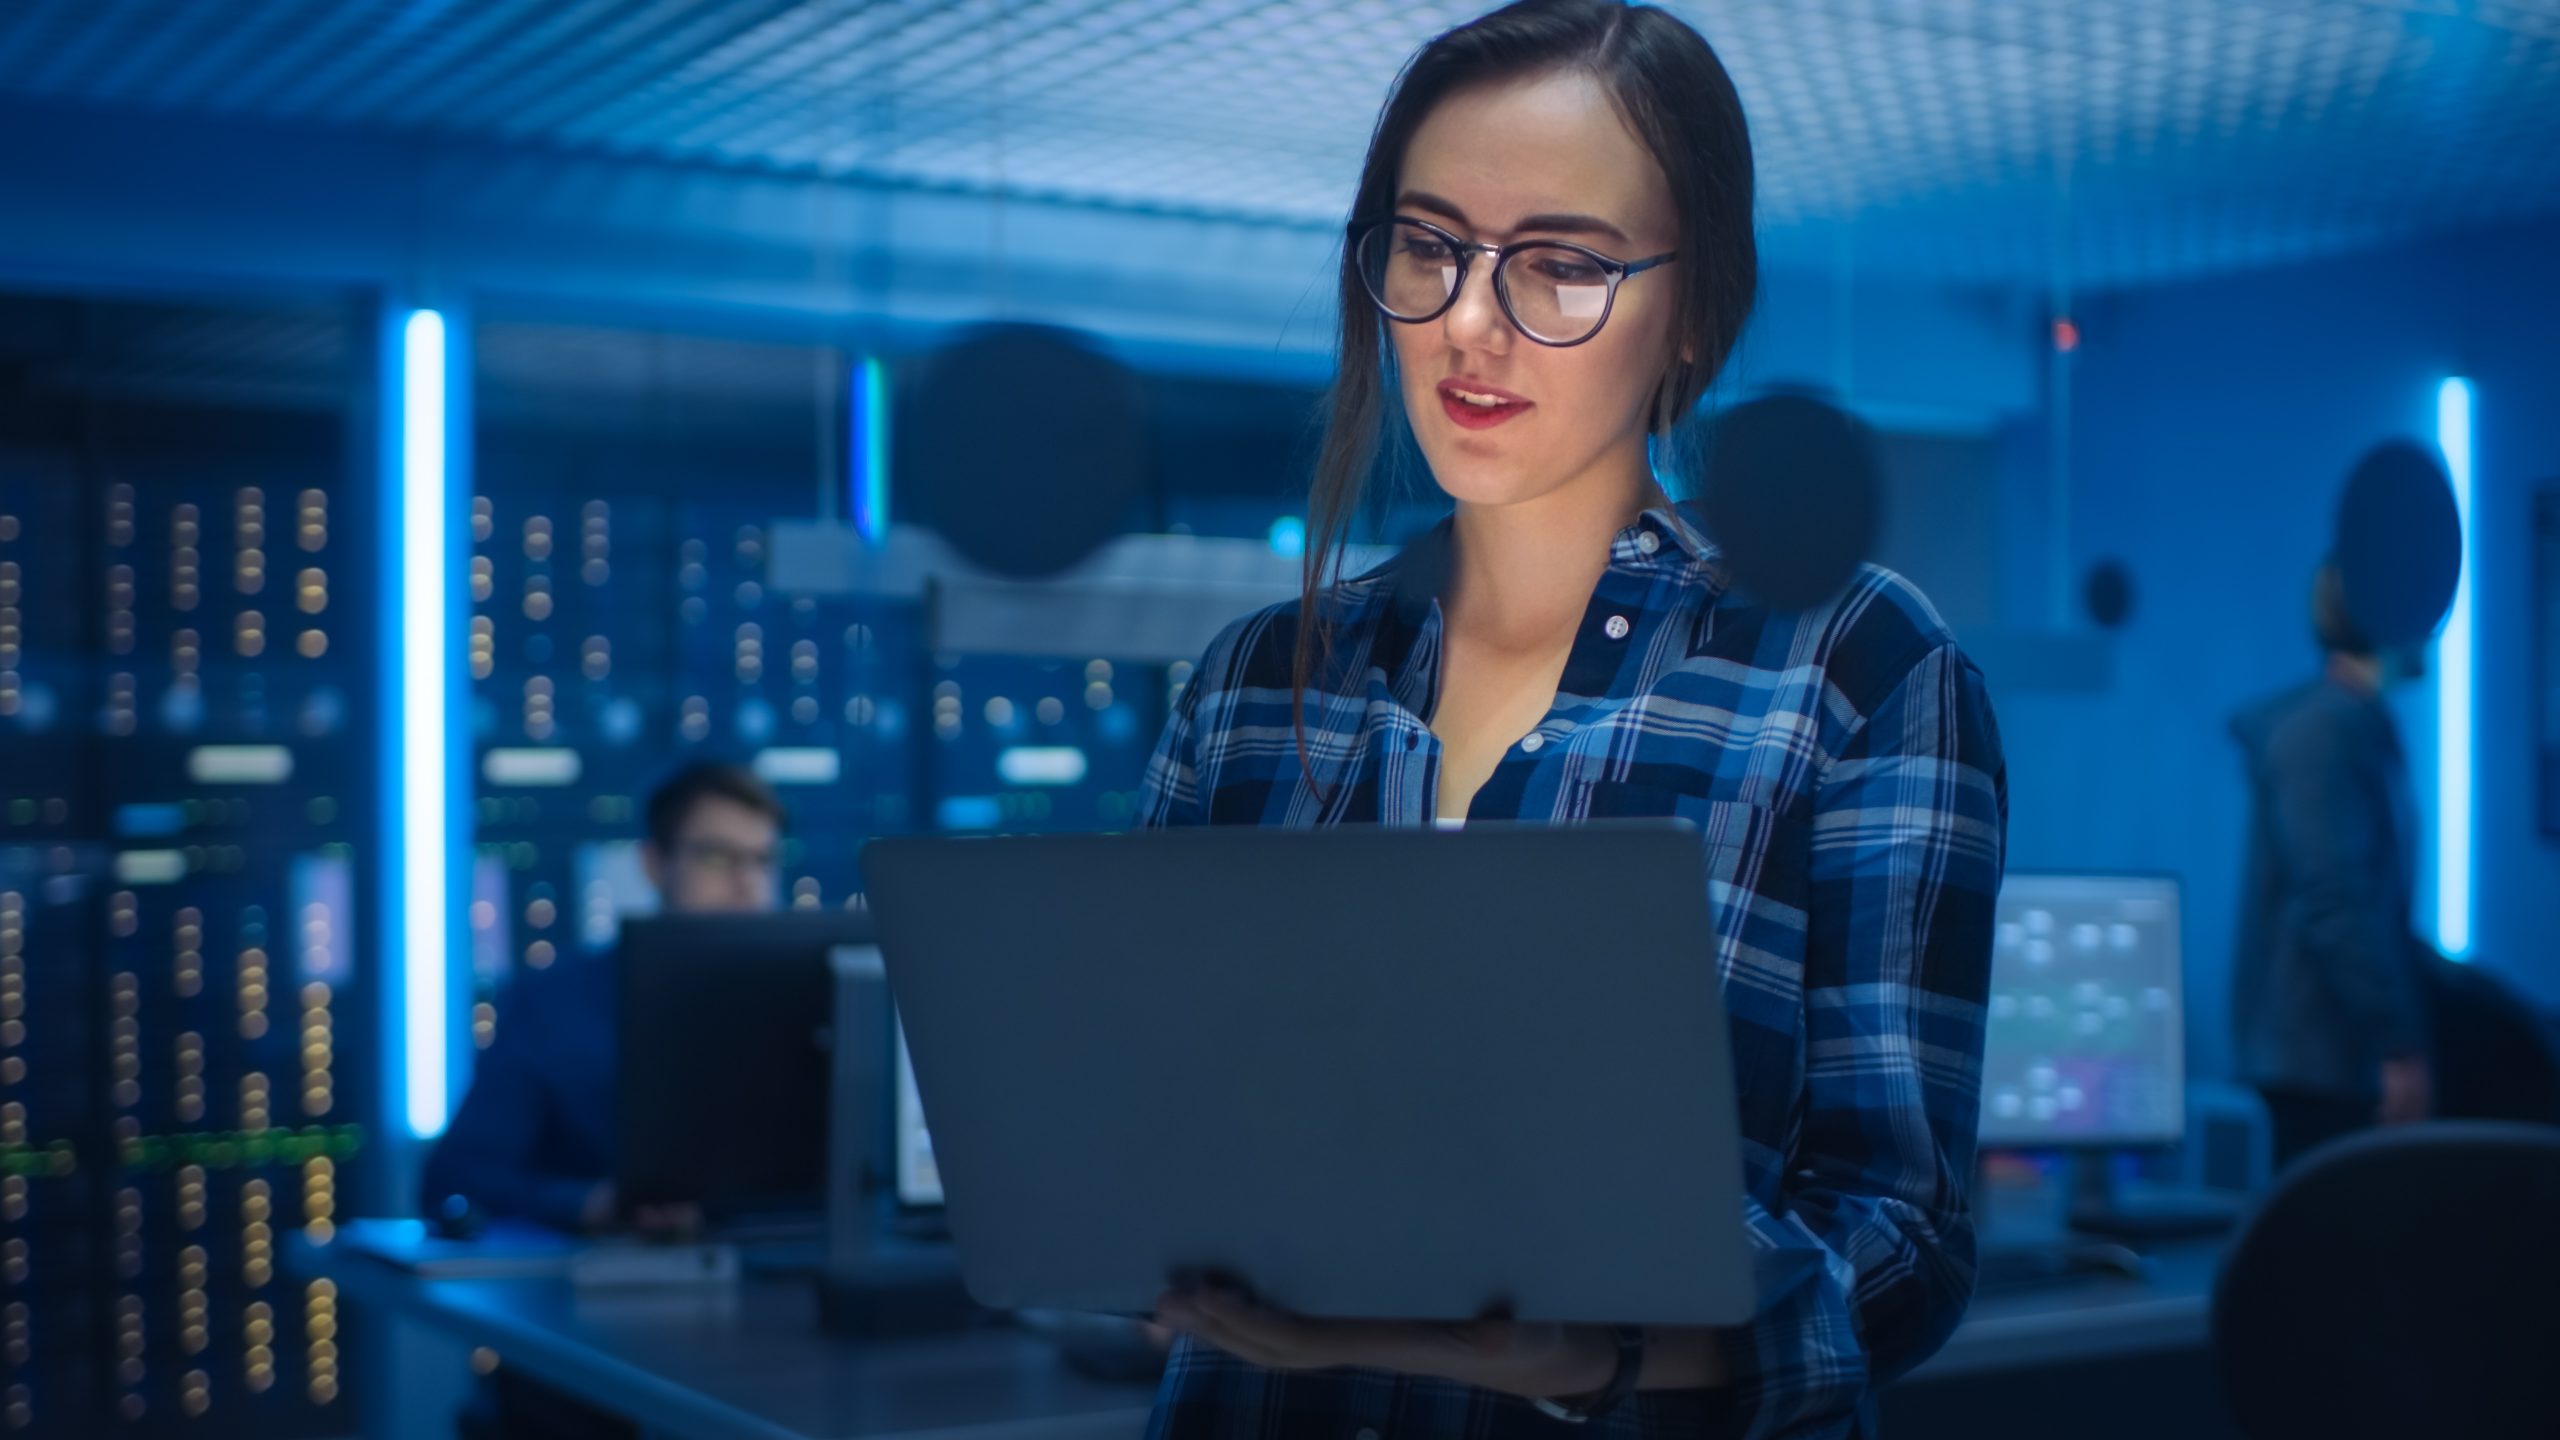 Portrait of a Smart Young Woman Wearing Glasses Holds Laptop. In the Background Technical Department Office with Specialists Working and Functional Data Server Racks